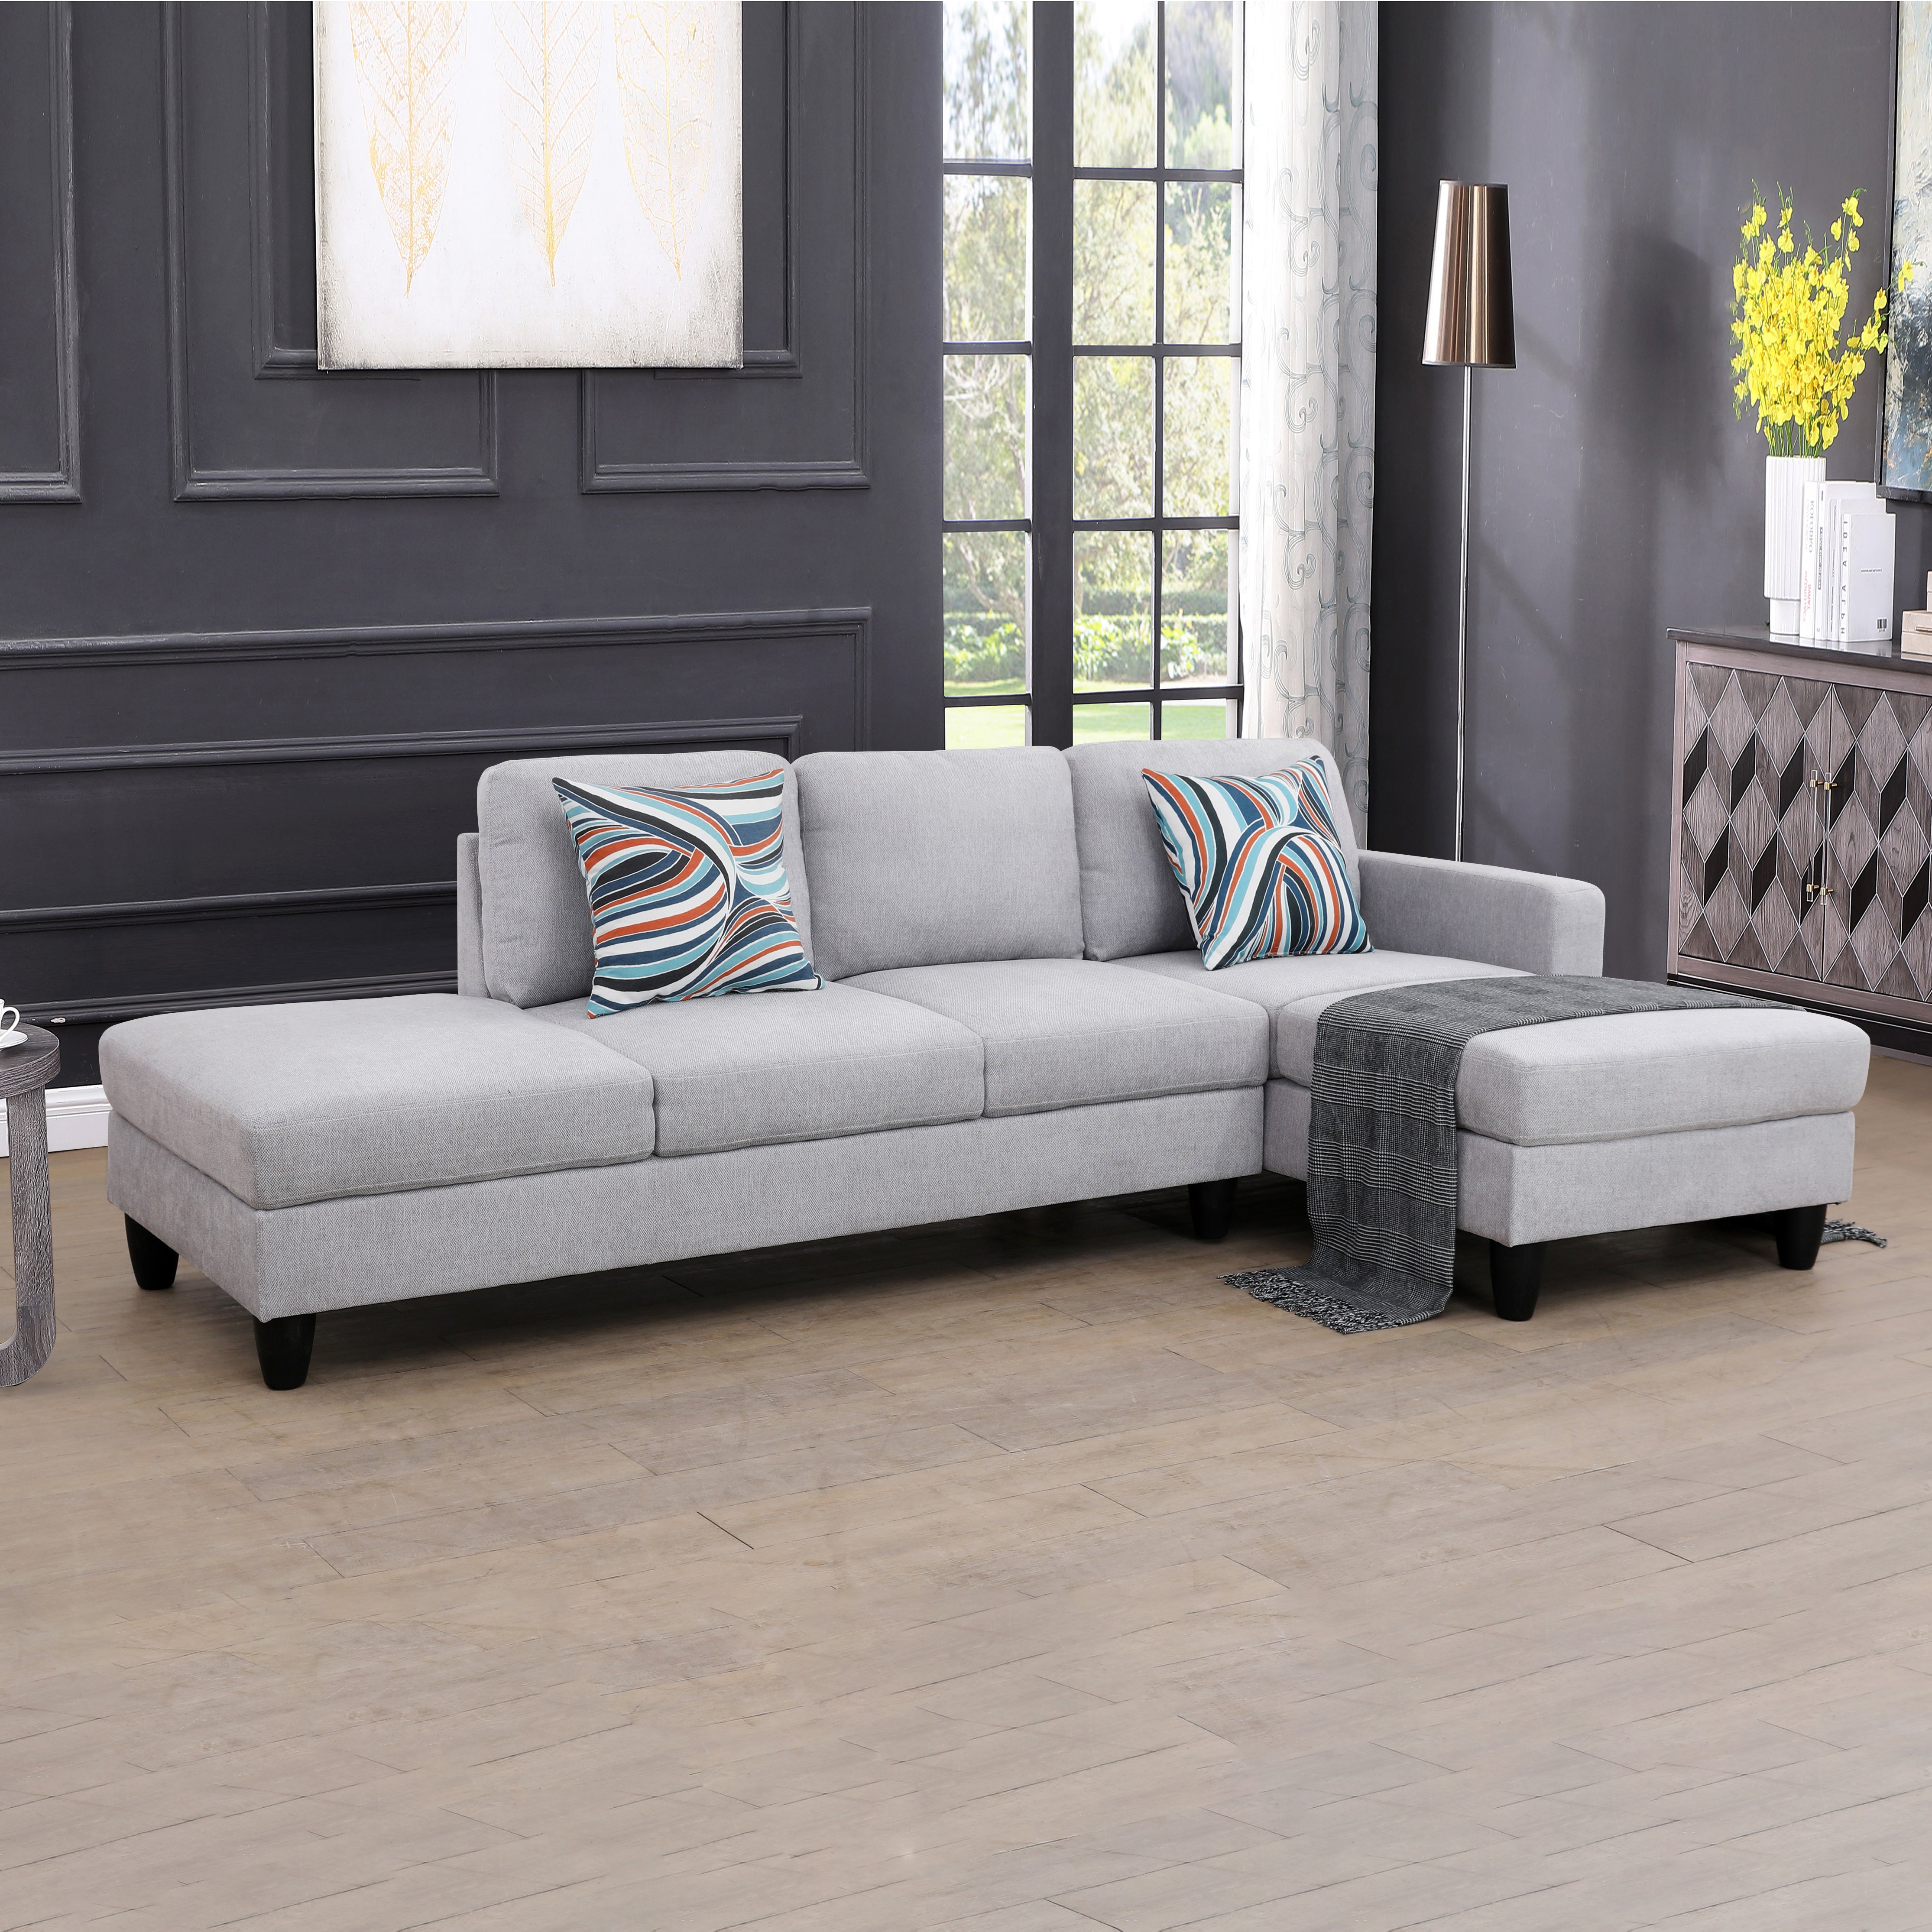 Ainehome Grey White Lint 2-Piece Couch Living Room Sofa Set